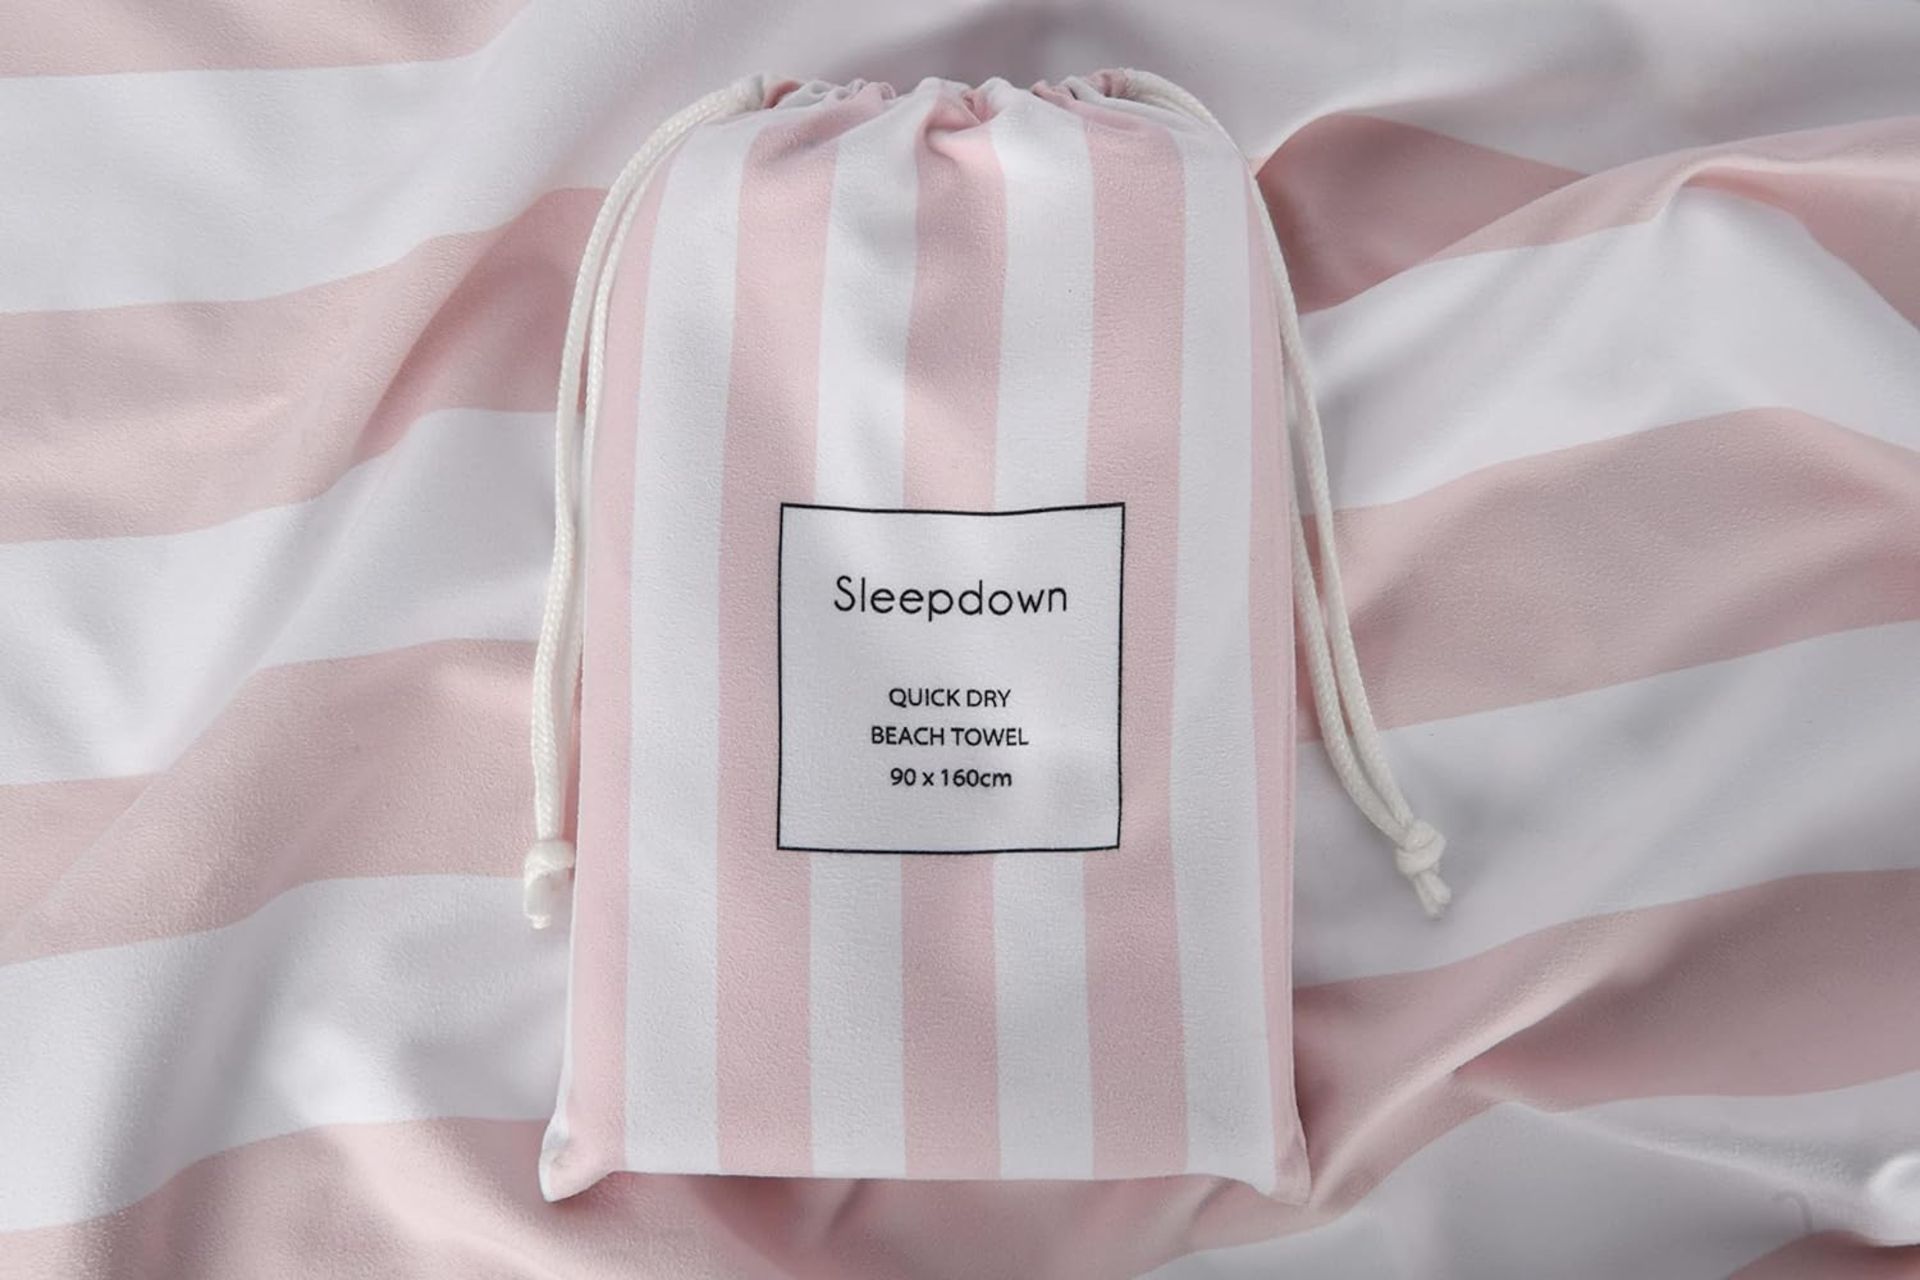 11x NEW & PACKAGED SLEEPDOWN Quick Dry Beach Towel 90 x 160cm With Carry Pouch - BLUSH. RRP £21.99 - Image 2 of 2